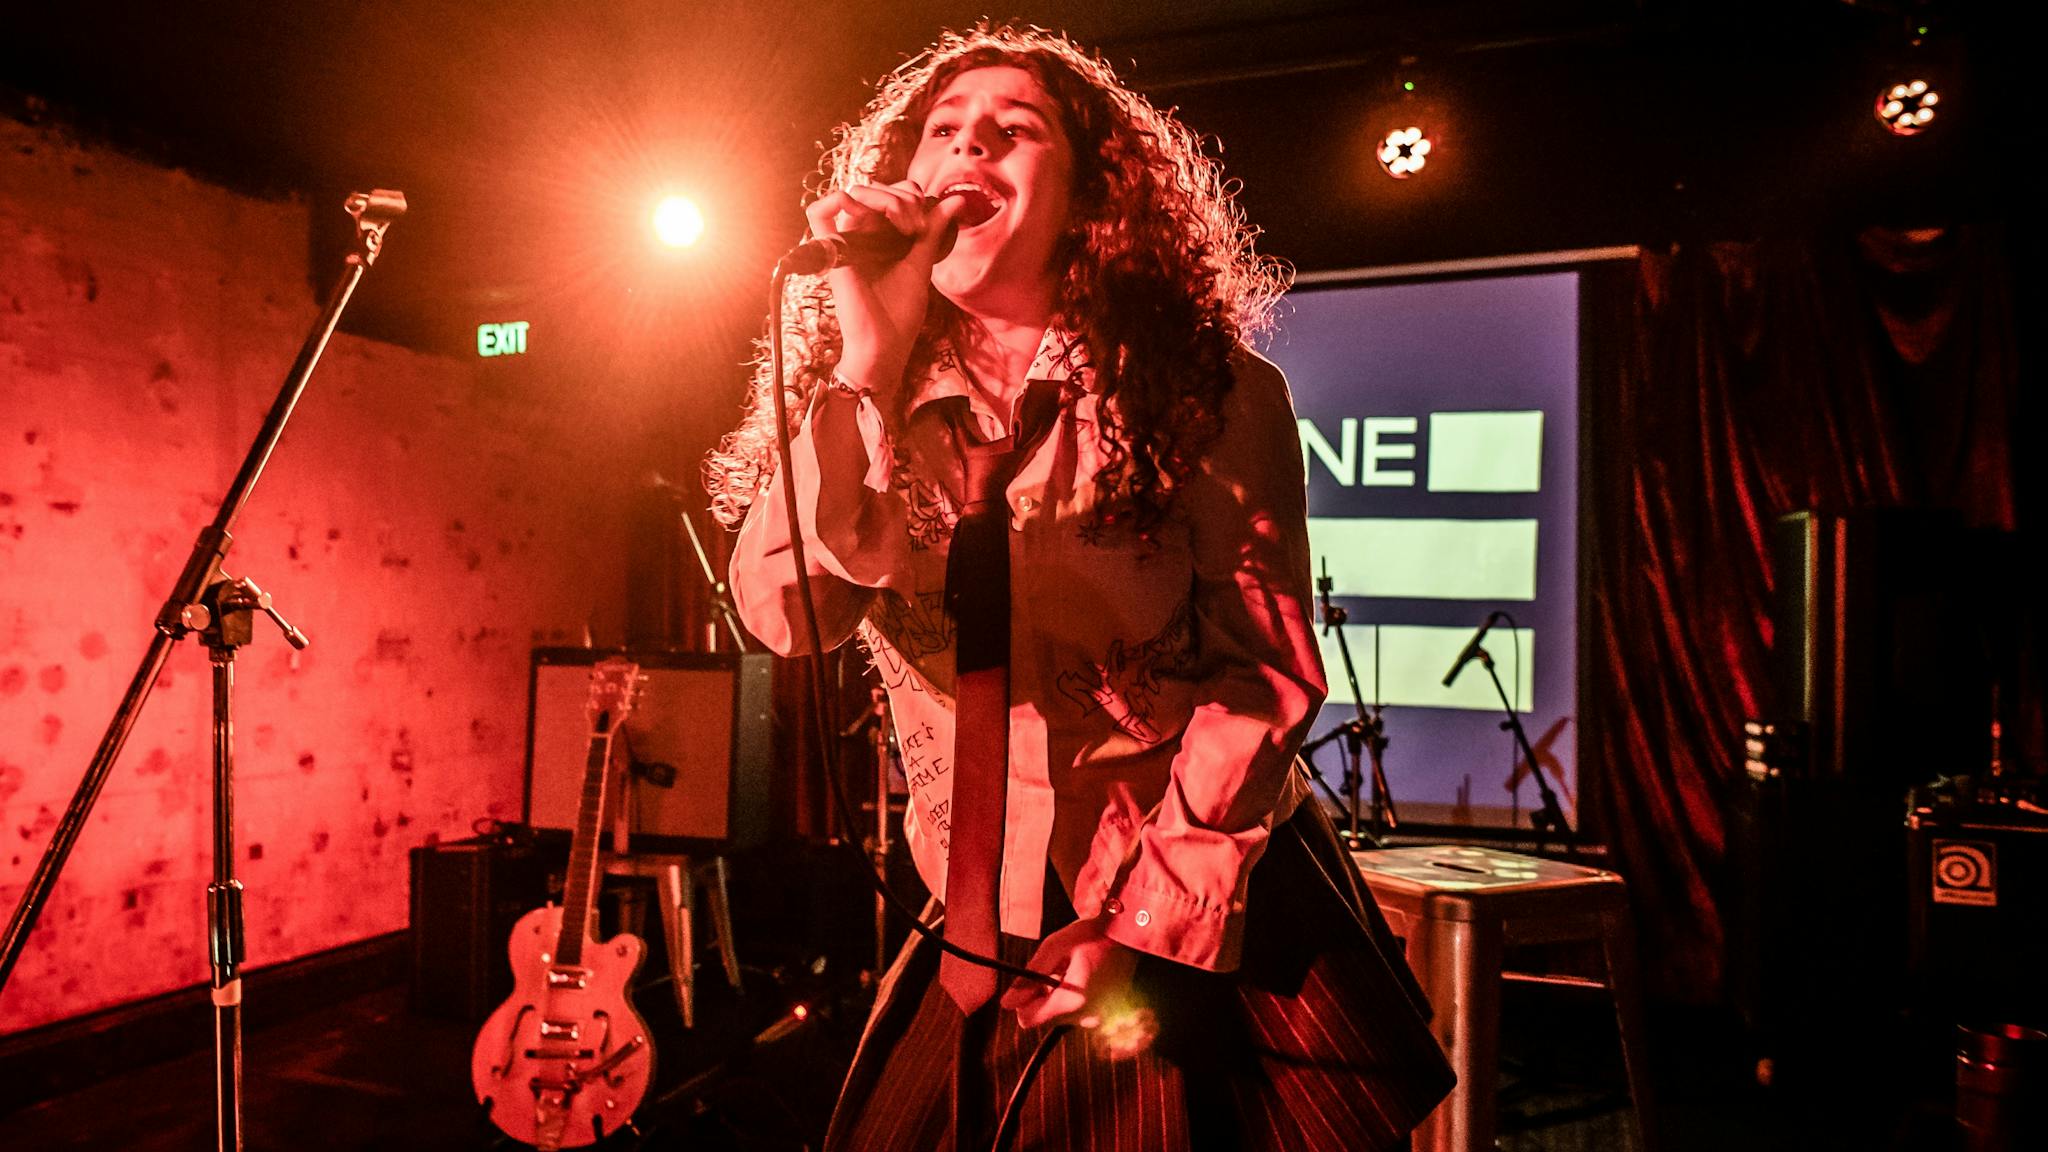 A female signer with long wavey hair leaning forward and singing into a microphone onstage.